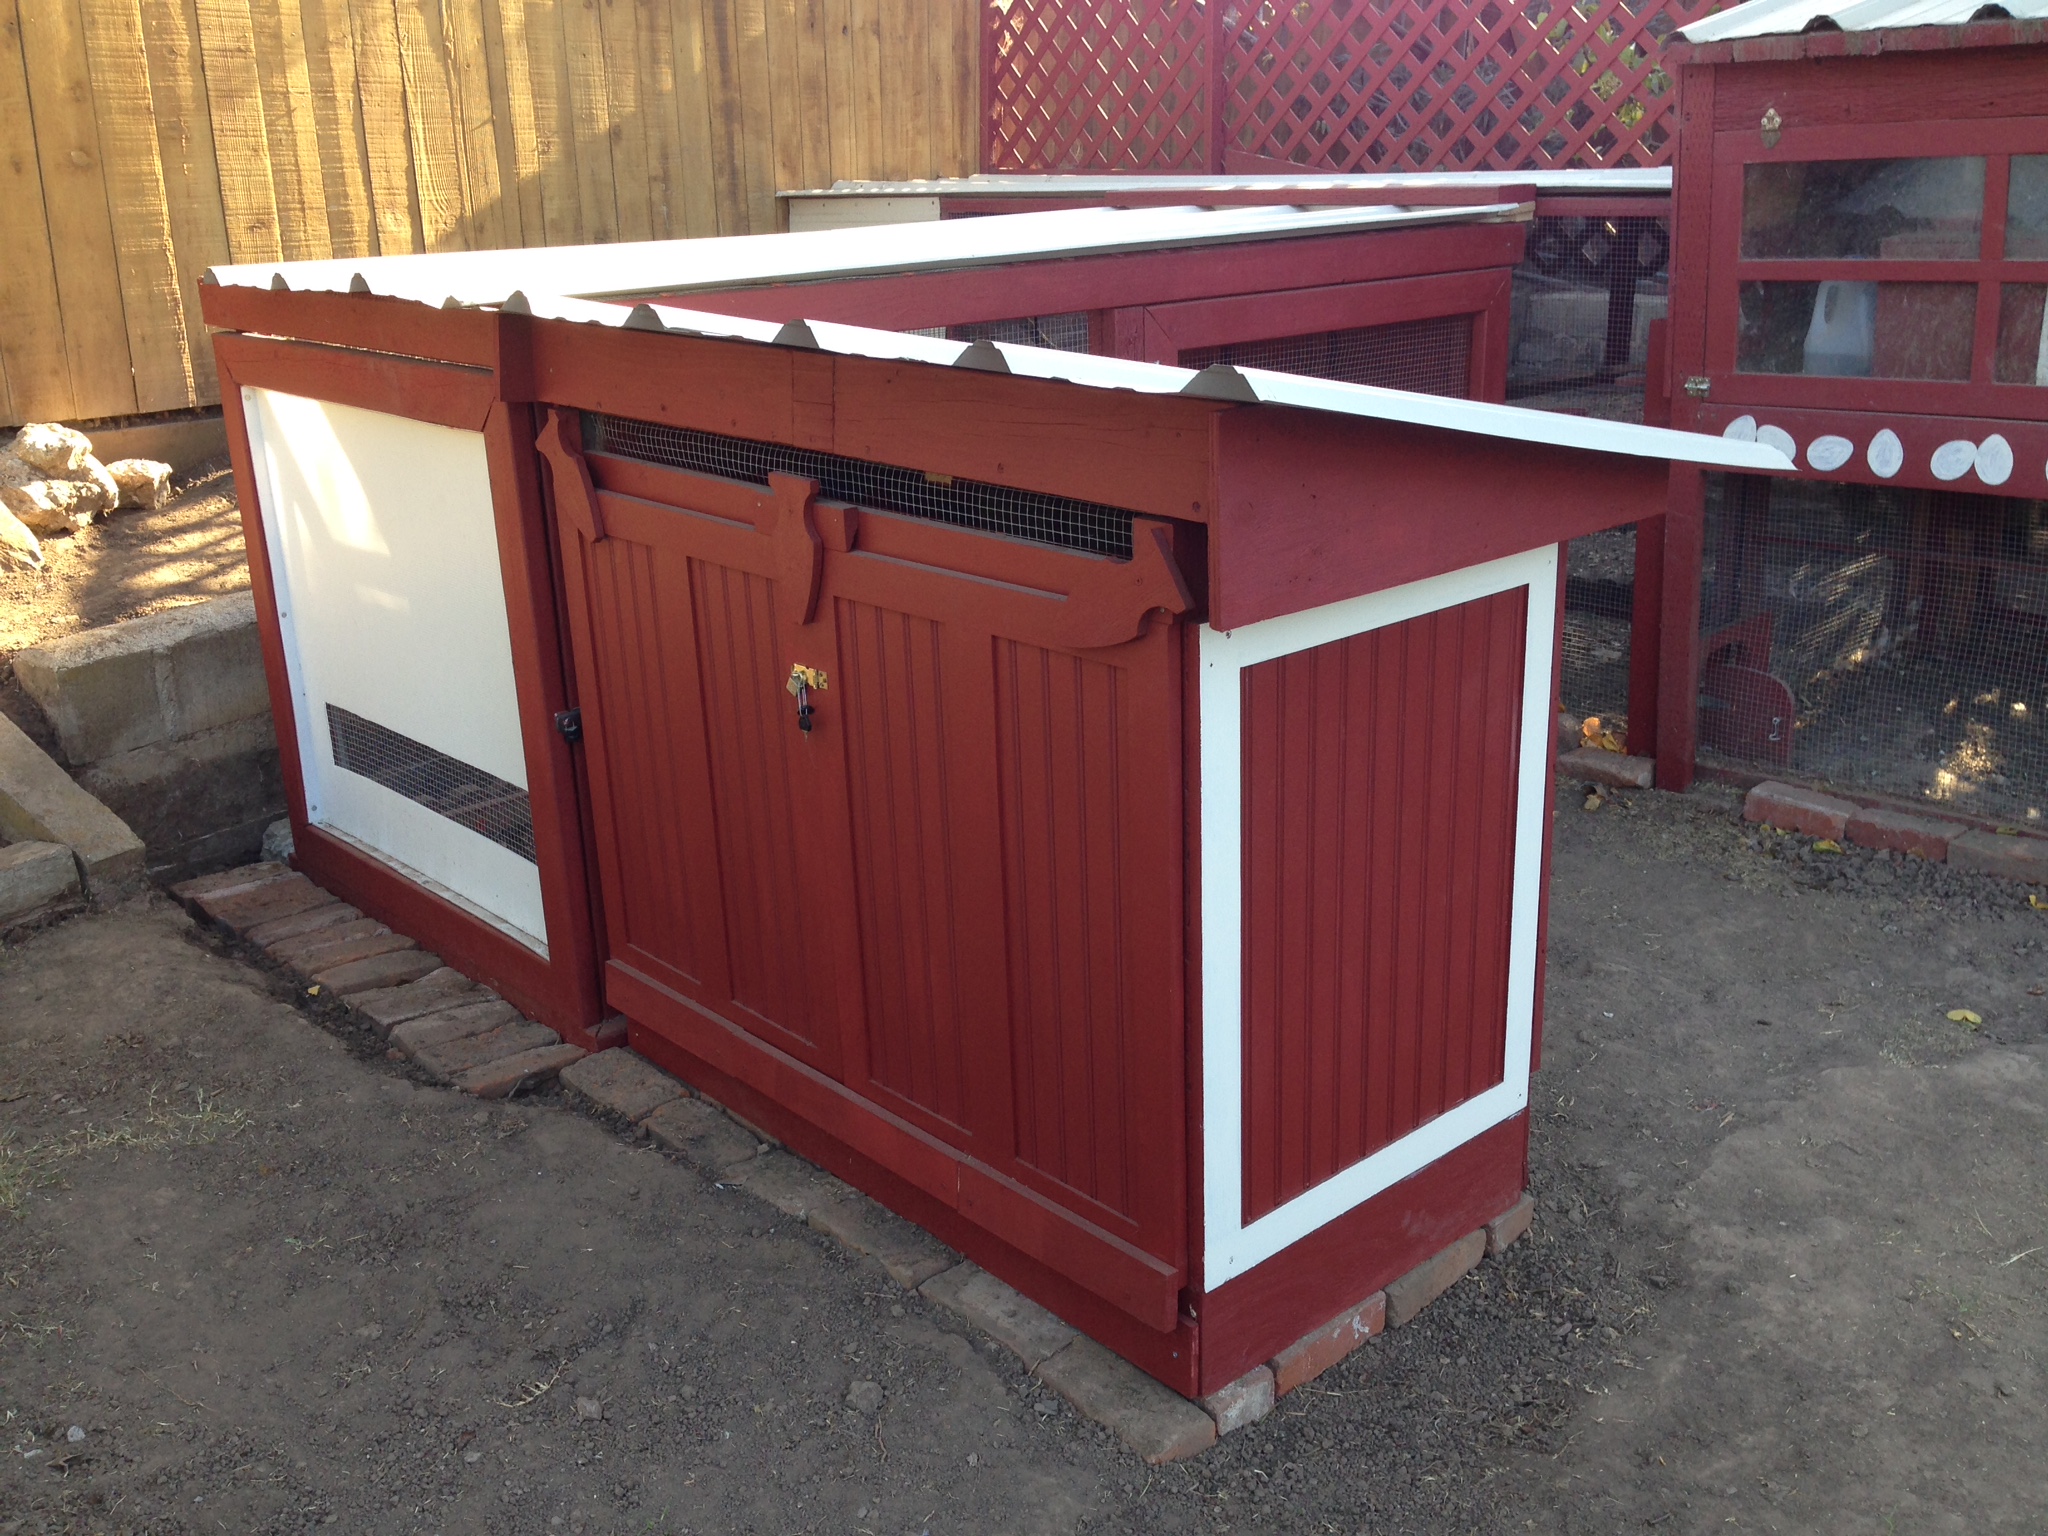 Here's their 2x4 coop, all finished.